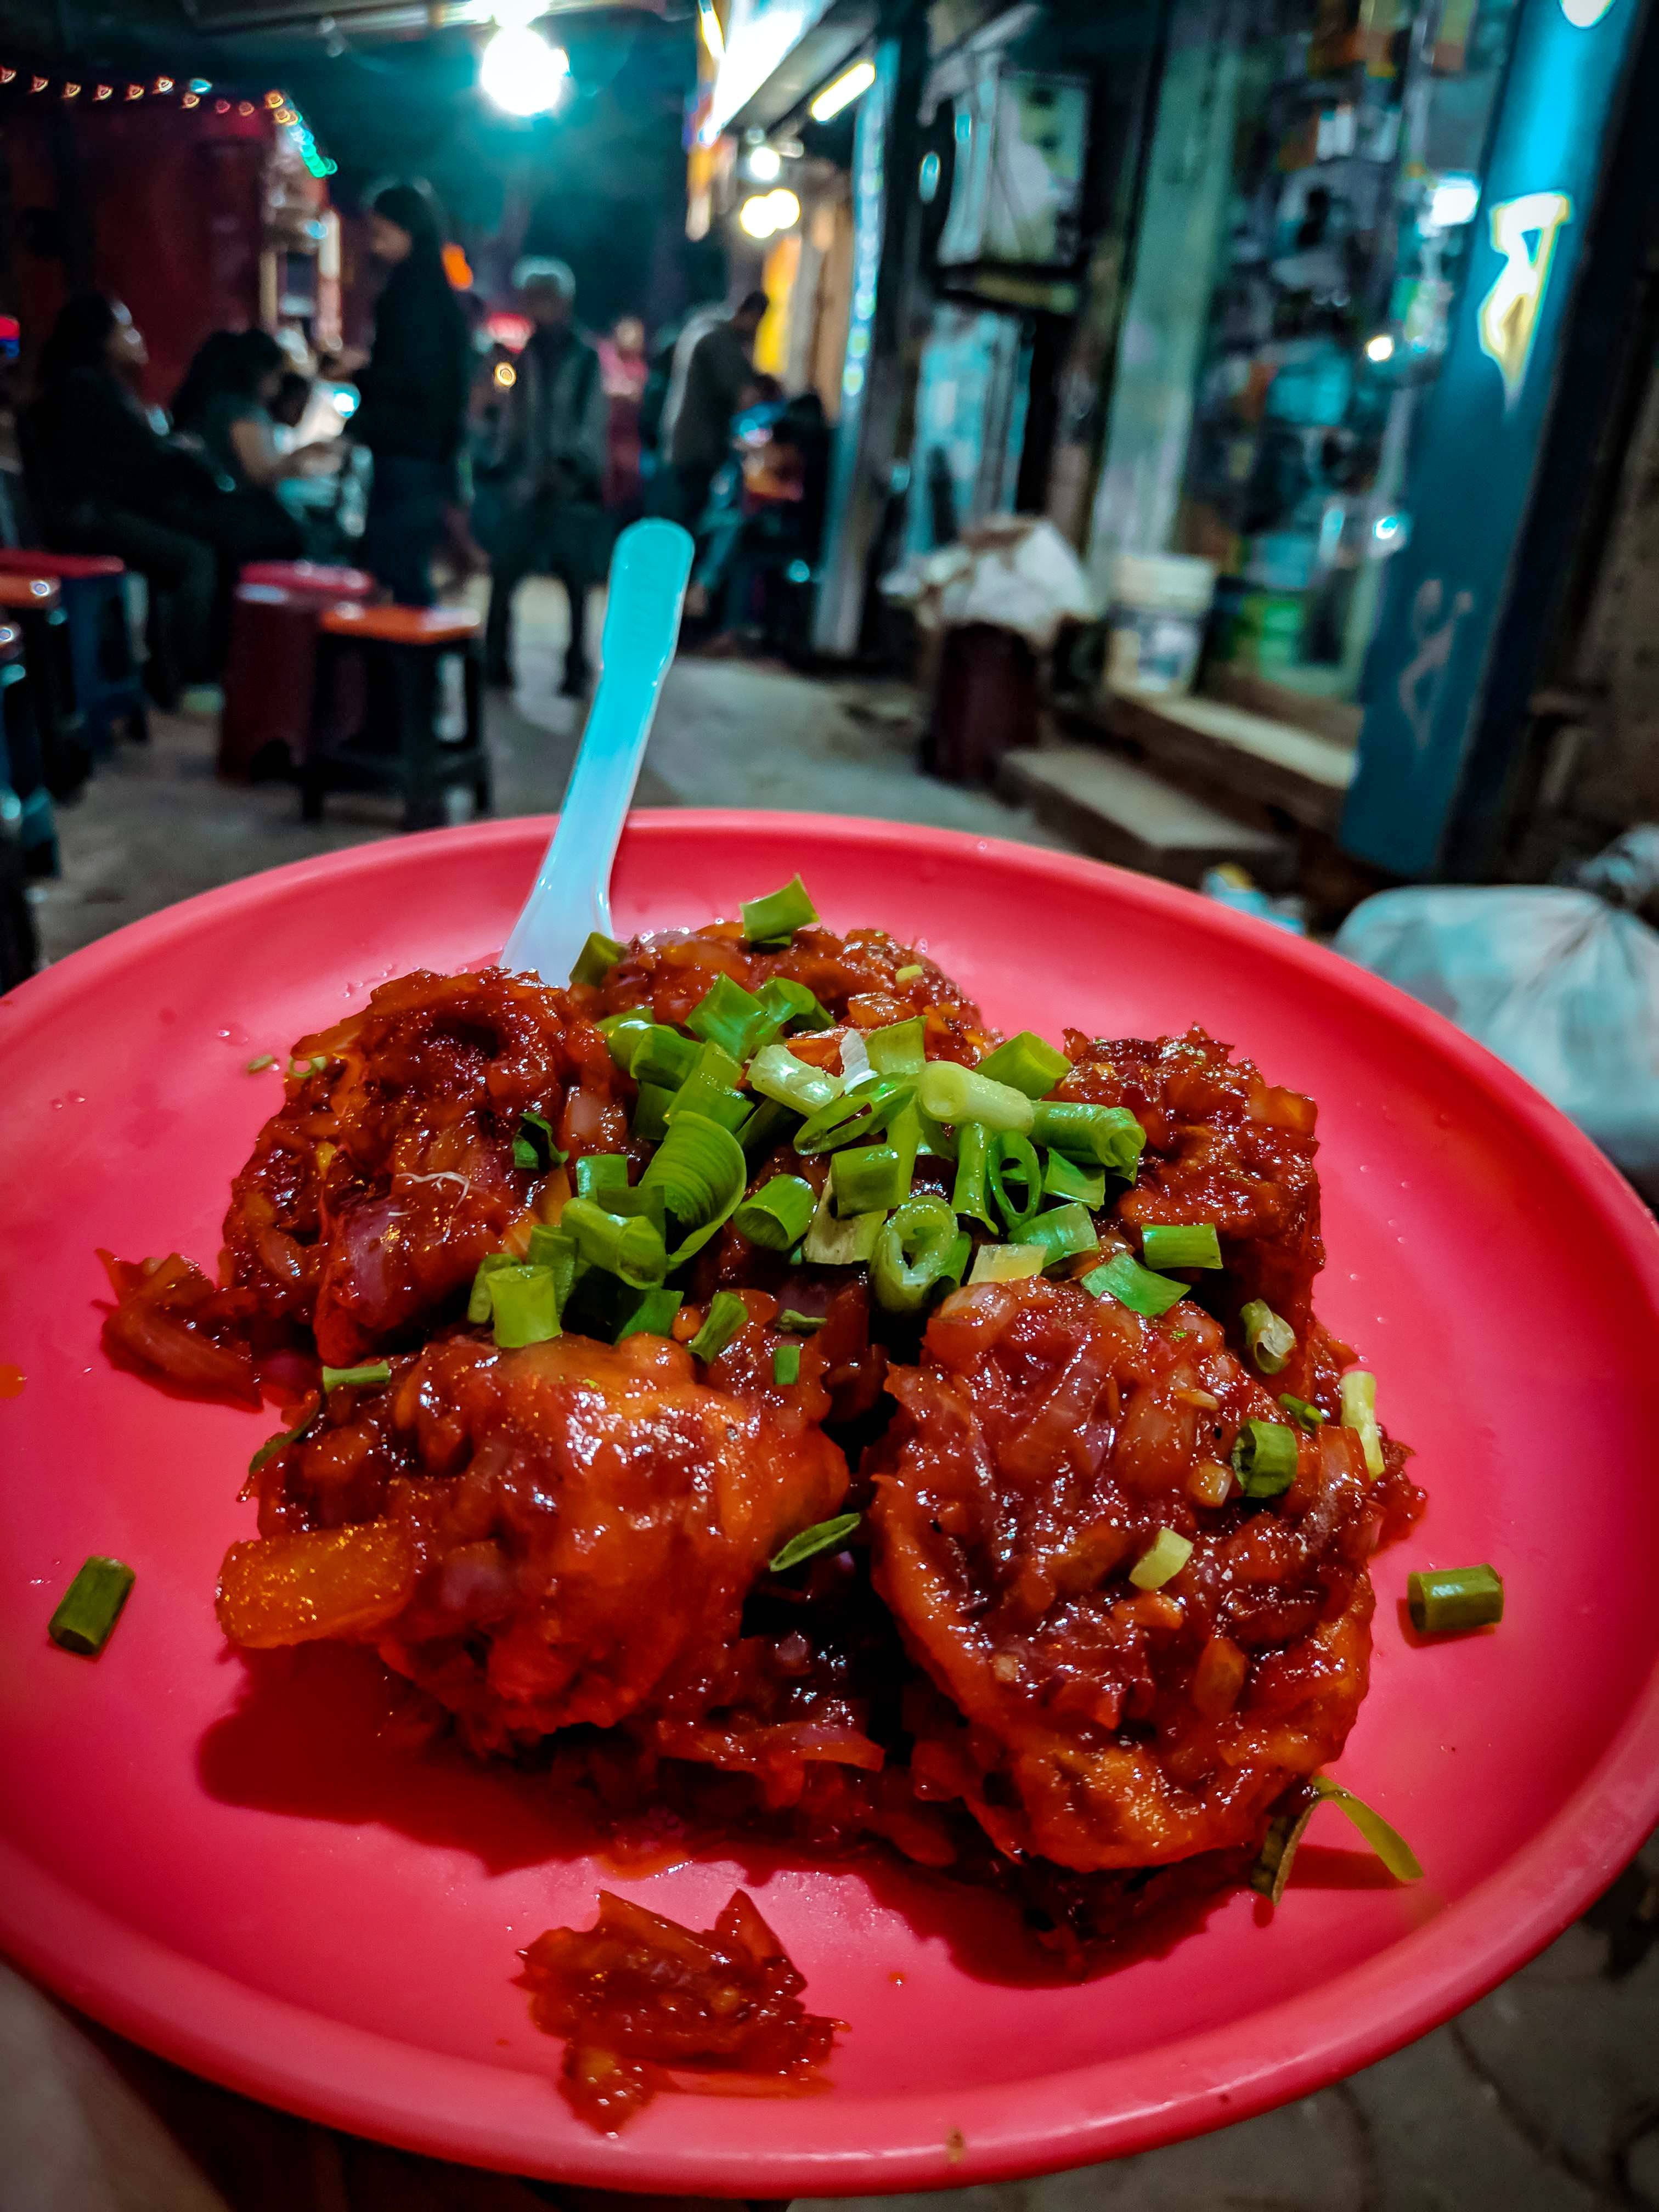 Dish,Cuisine,Food,Ingredient,Meat,General tso's chicken,Produce,Fried food,Recipe,Singaporean cuisine